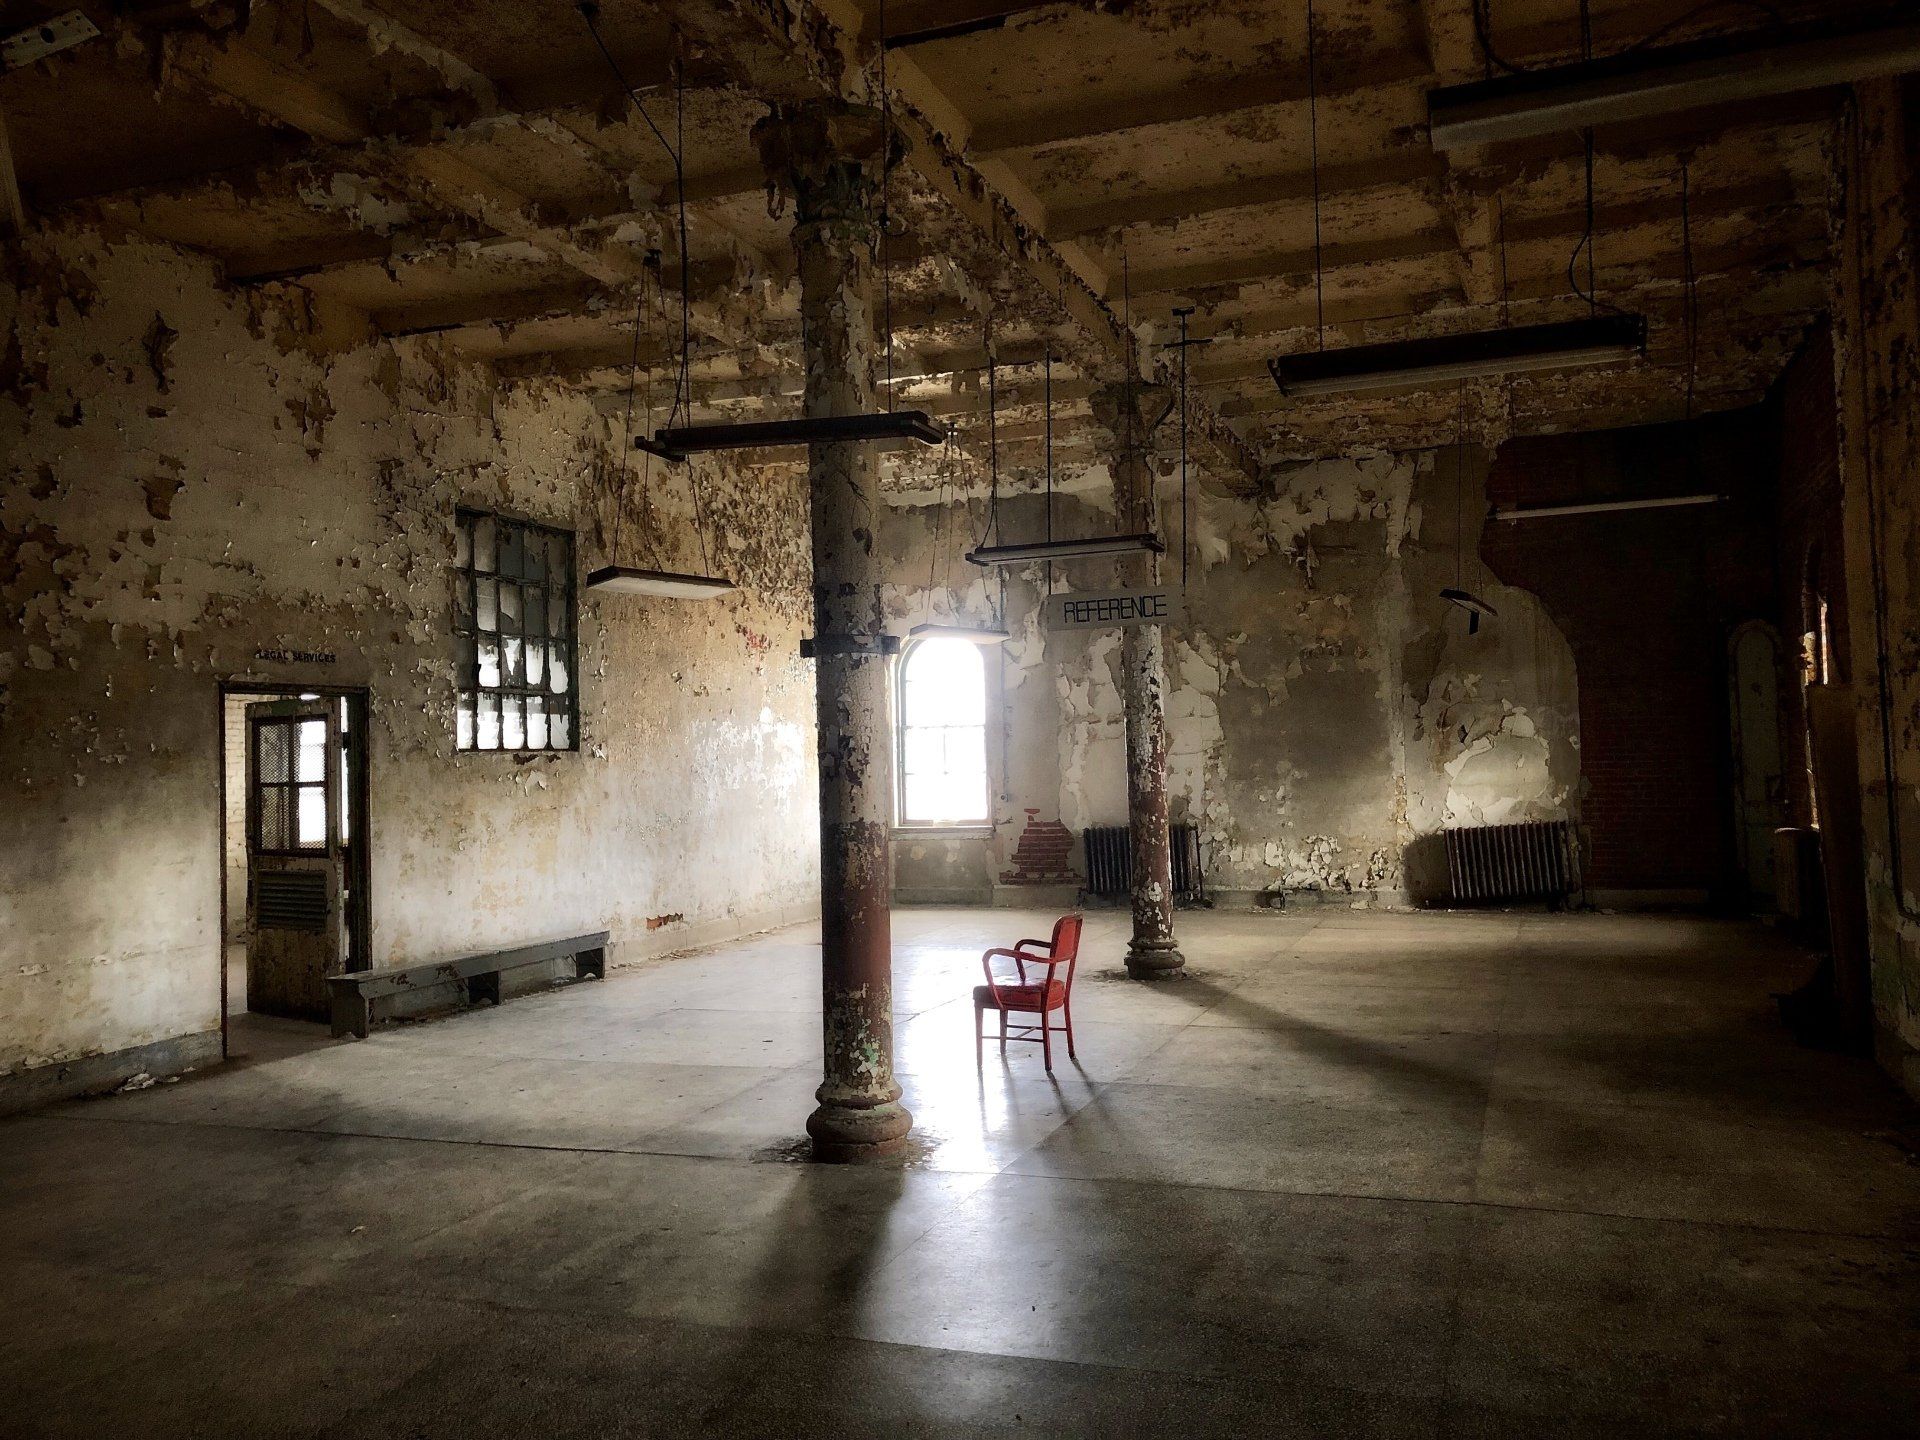 An empty room with a red chair in the middle